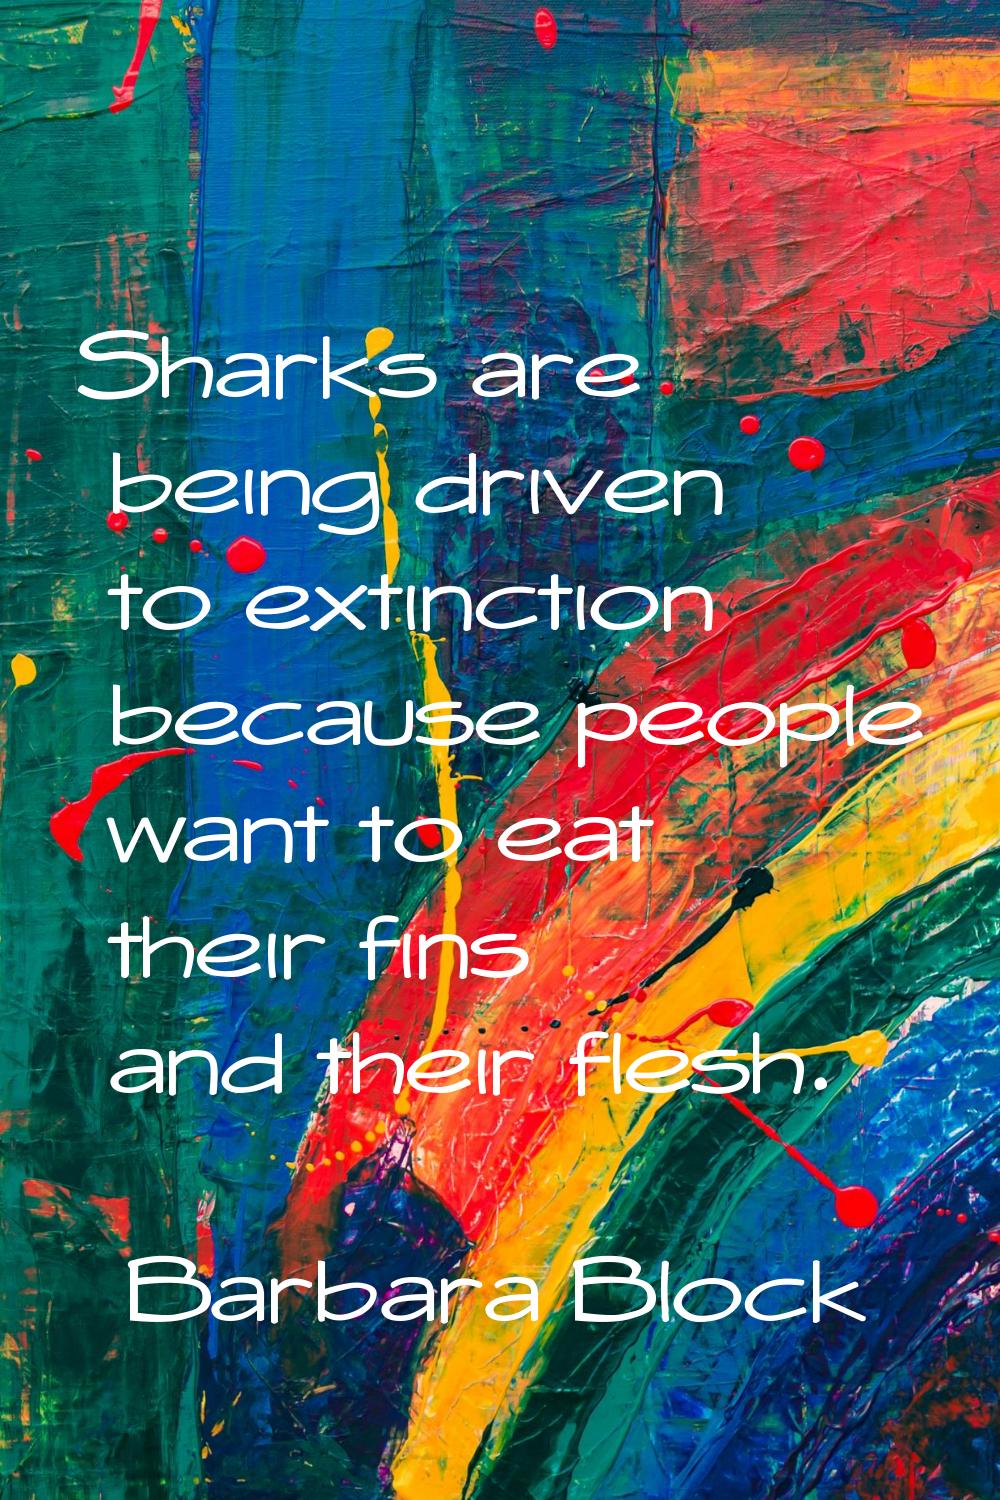 Sharks are being driven to extinction because people want to eat their fins and their flesh.